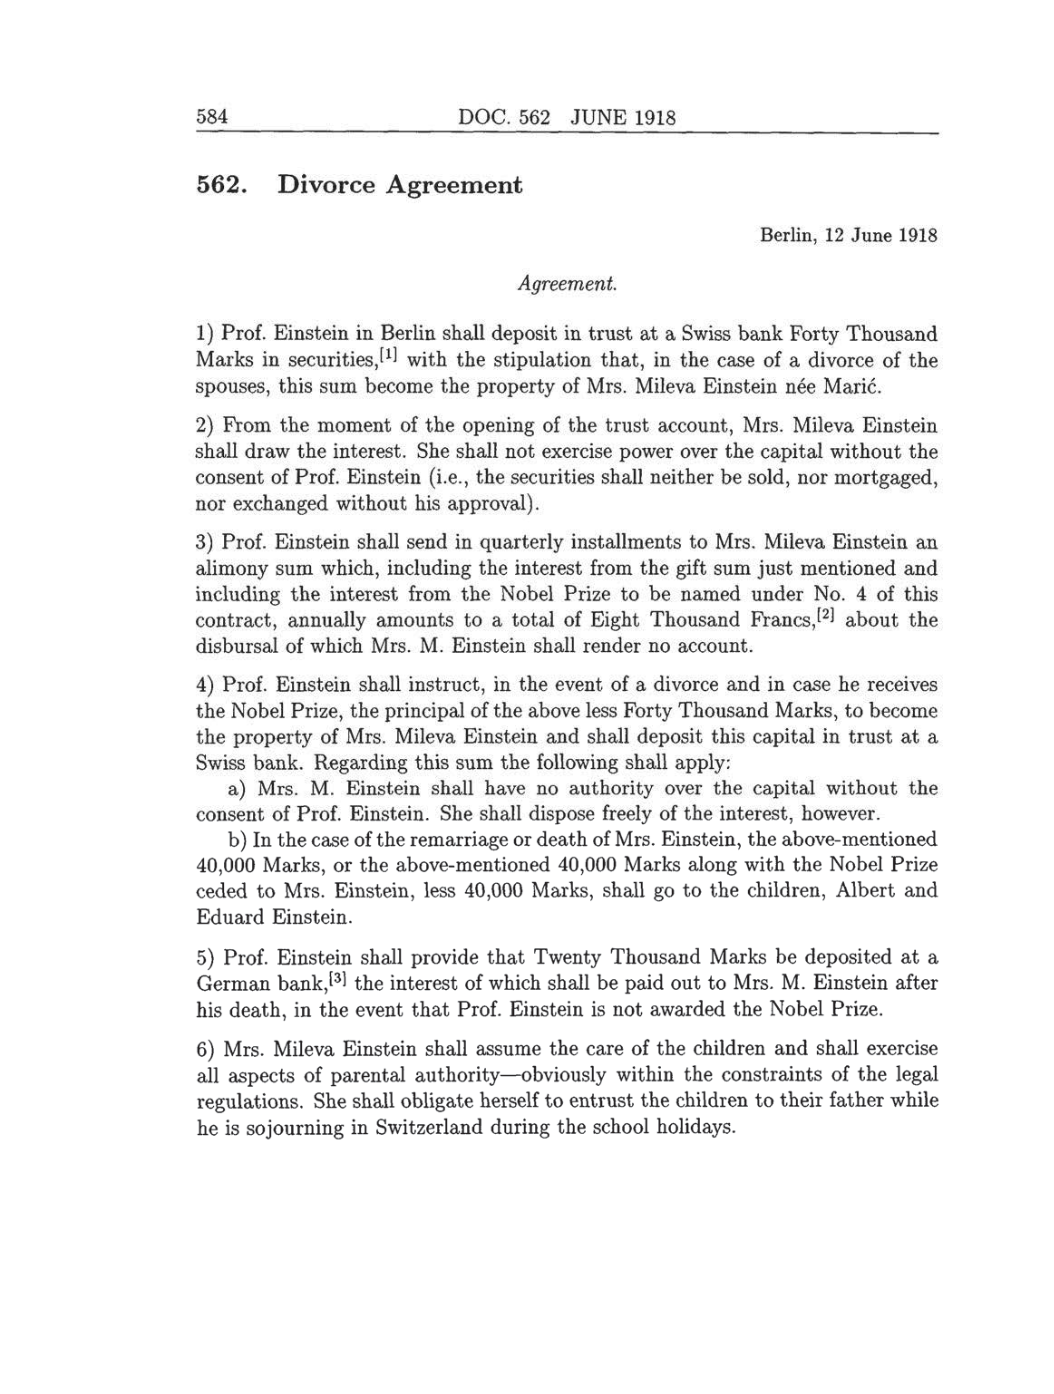 Volume 8: The Berlin Years: Correspondence, 1914-1918 (English translation supplement) page 584